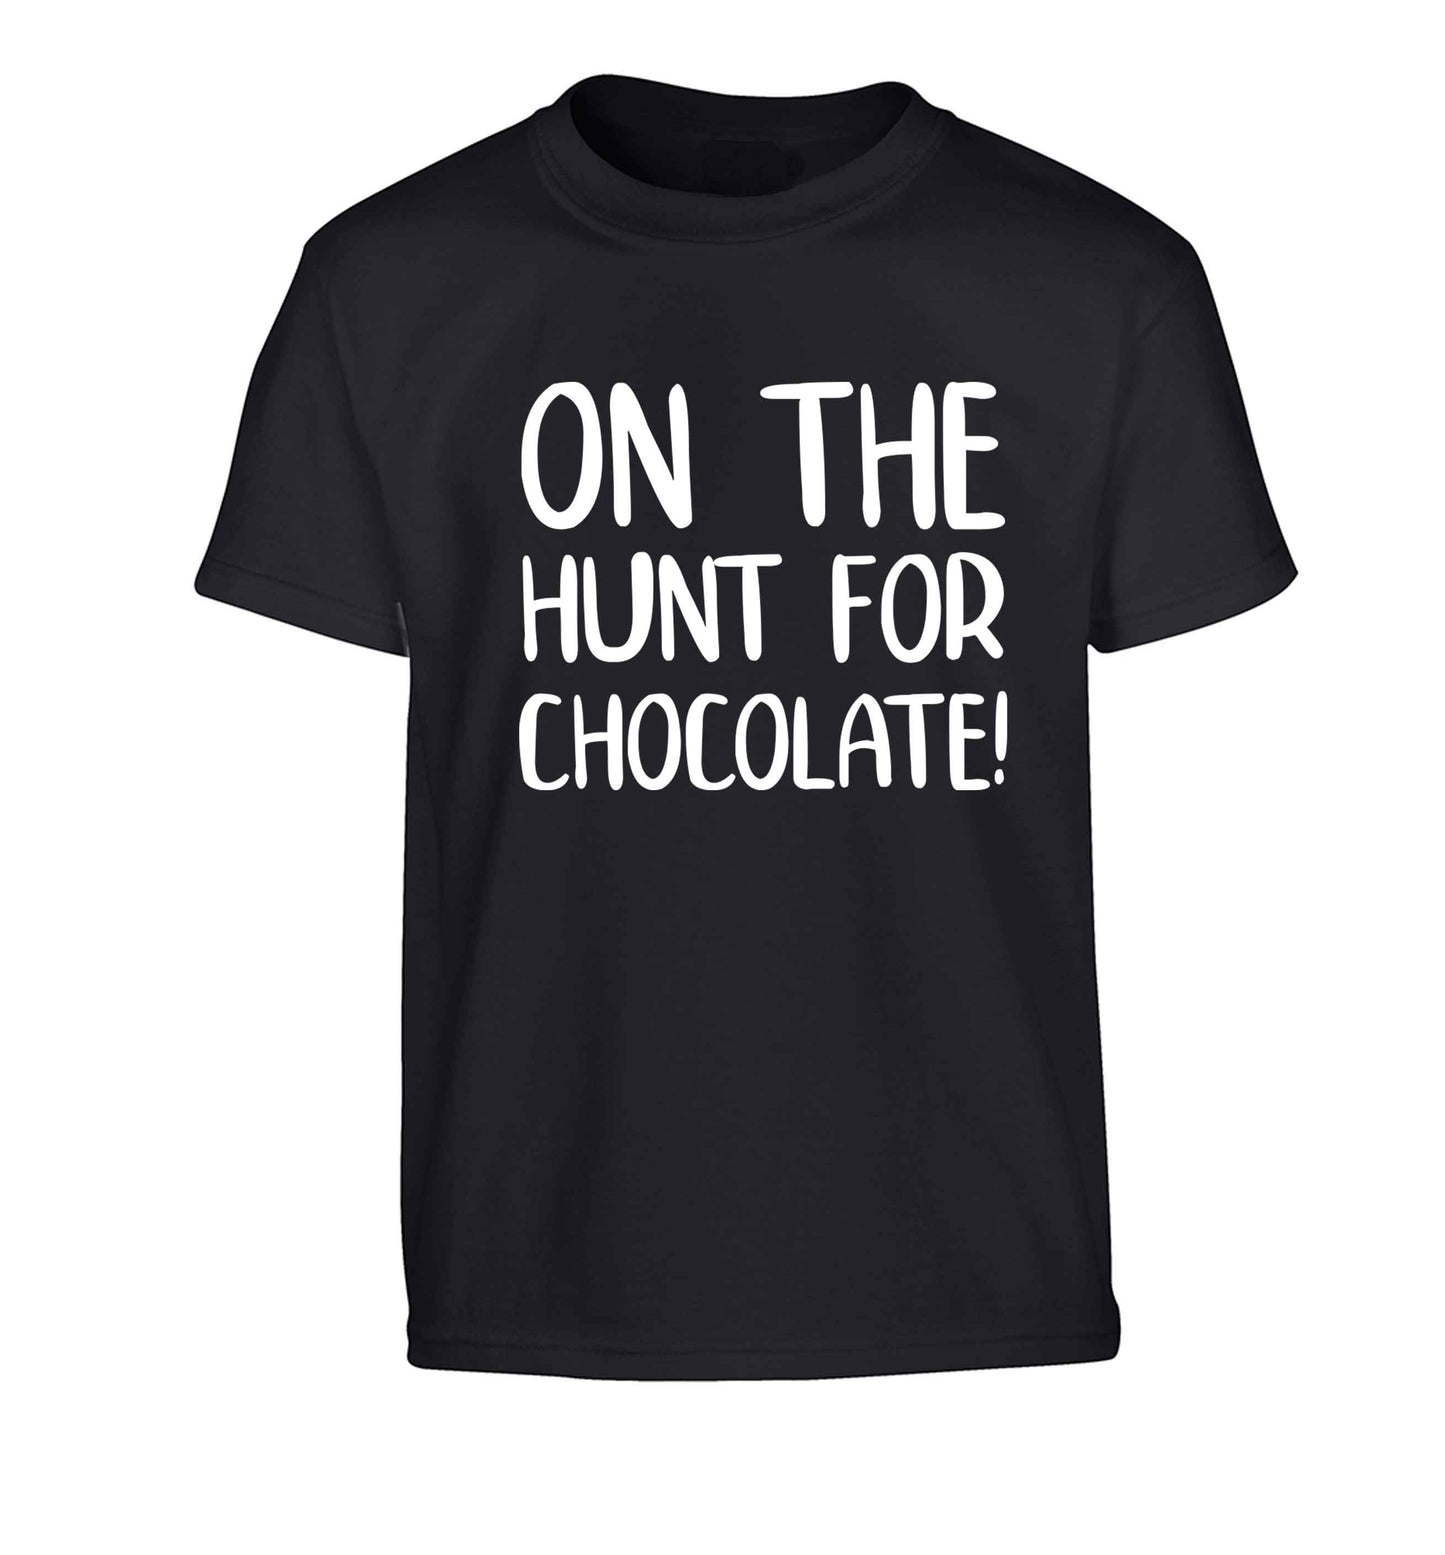 On the hunt for chocolate! Children's black Tshirt 12-13 Years